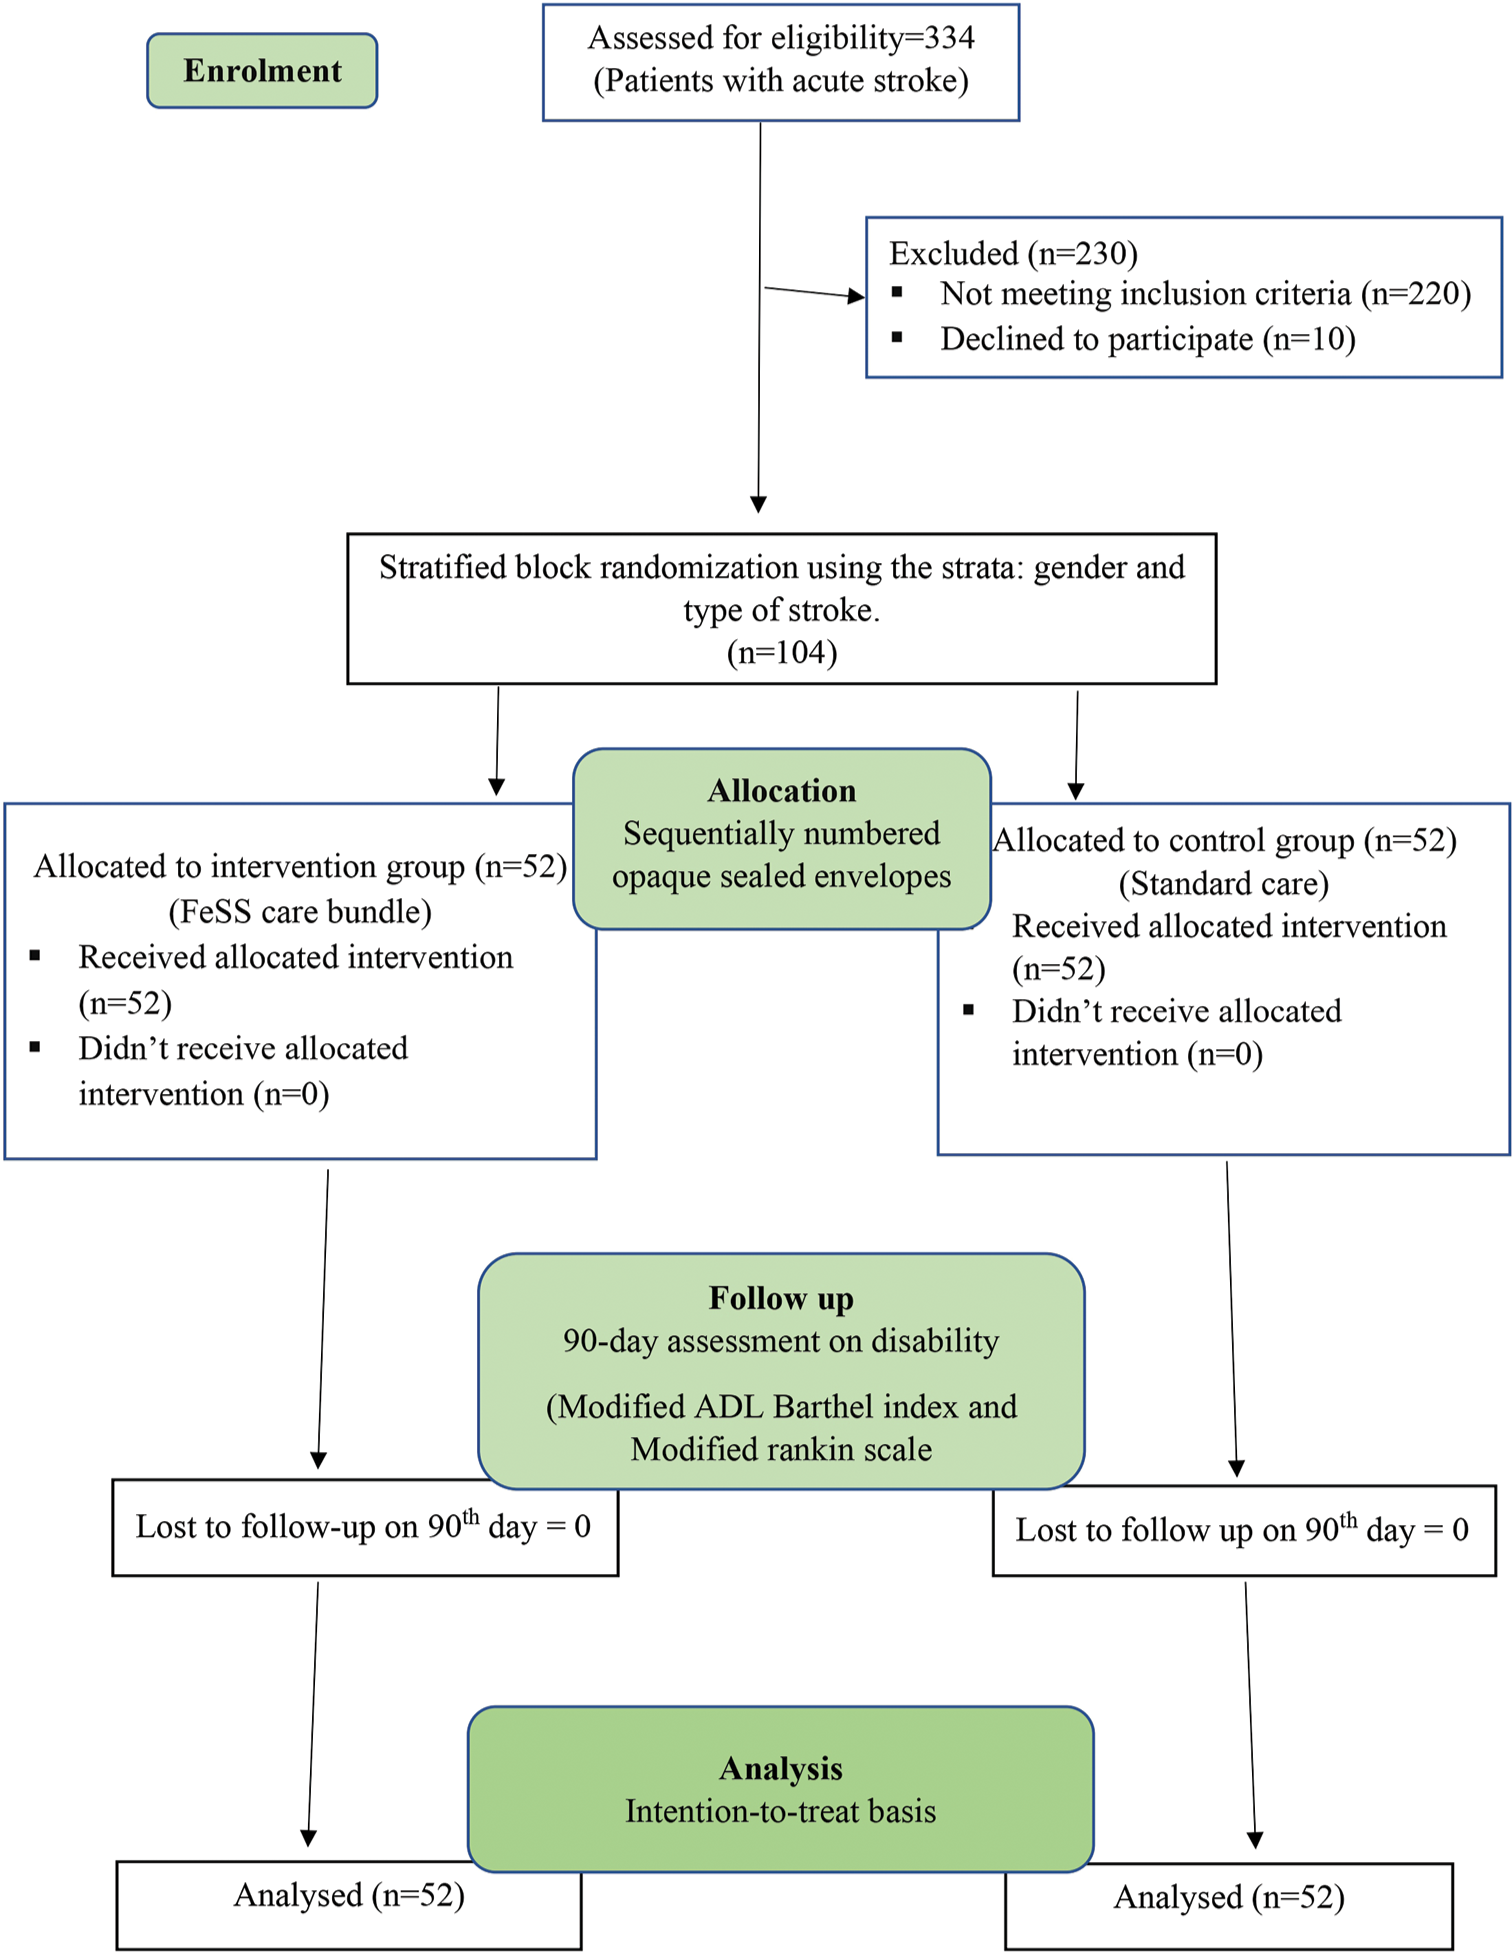 Effectiveness of nurse-led fever, sugar-hyperglycemia, and swallowing bundle care on clinical outcome of patients with stroke at a tertiary care center: A randomized controlled trial